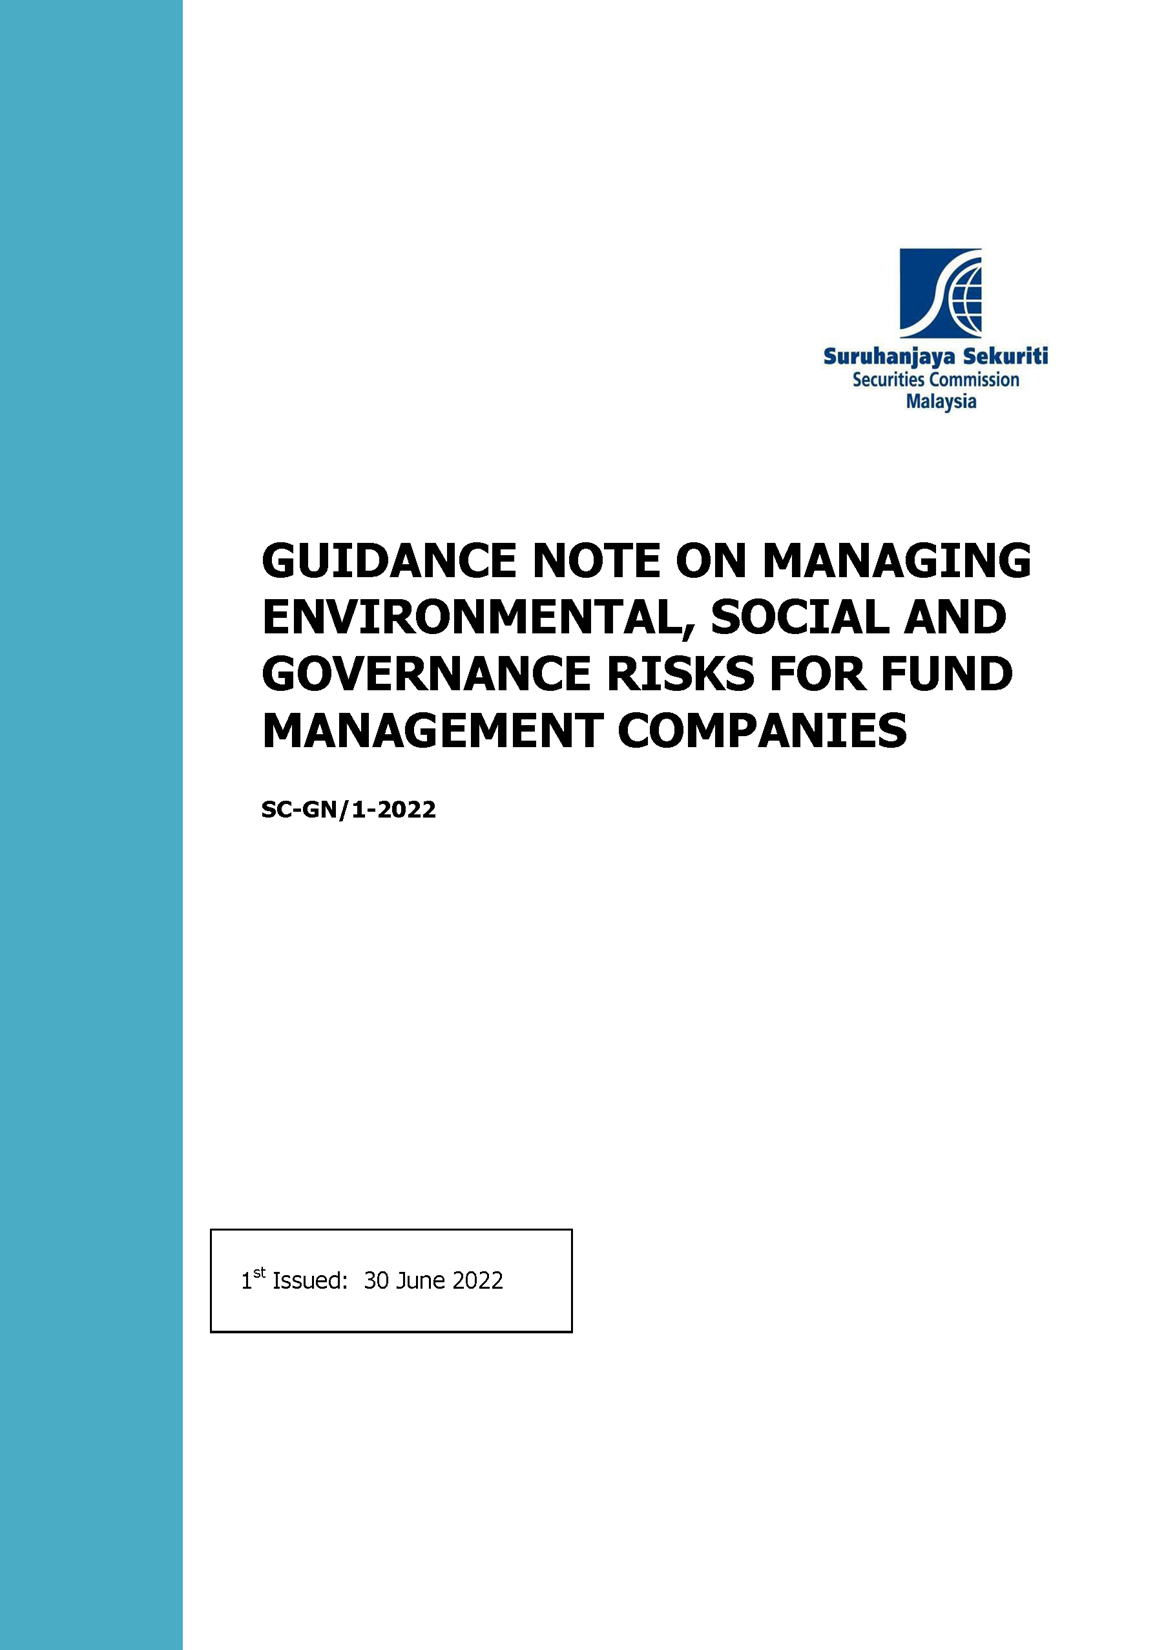  Guidance Note on Managing Environmental, Social and Governance Risks for Fund Management Companies 